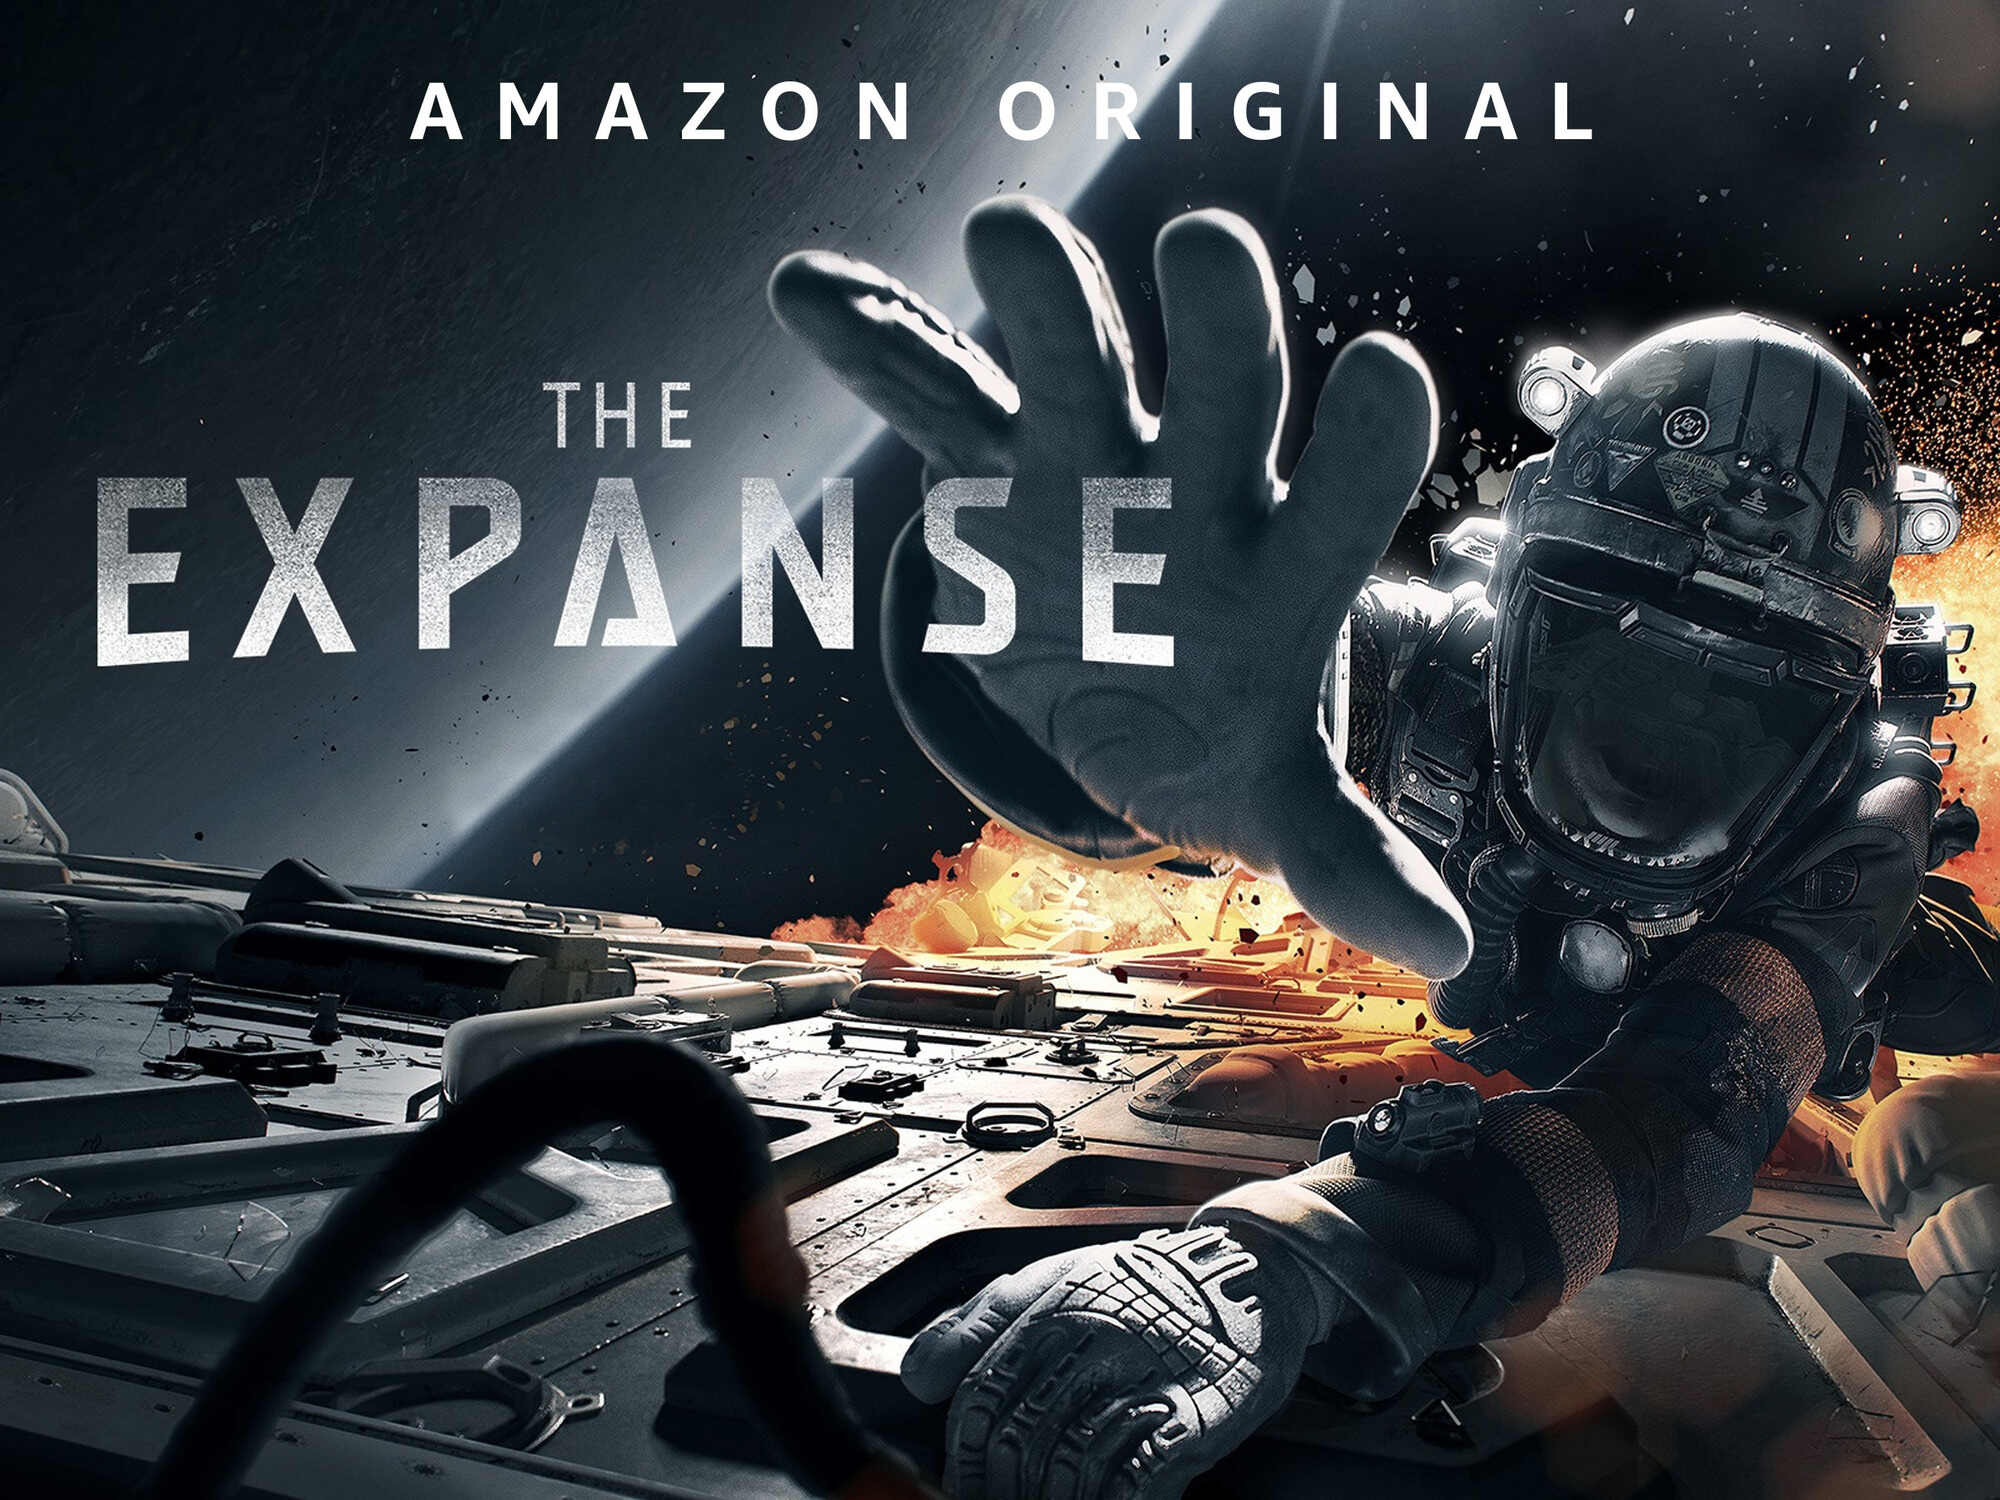 15-astonishing-facts-about-the-expanse